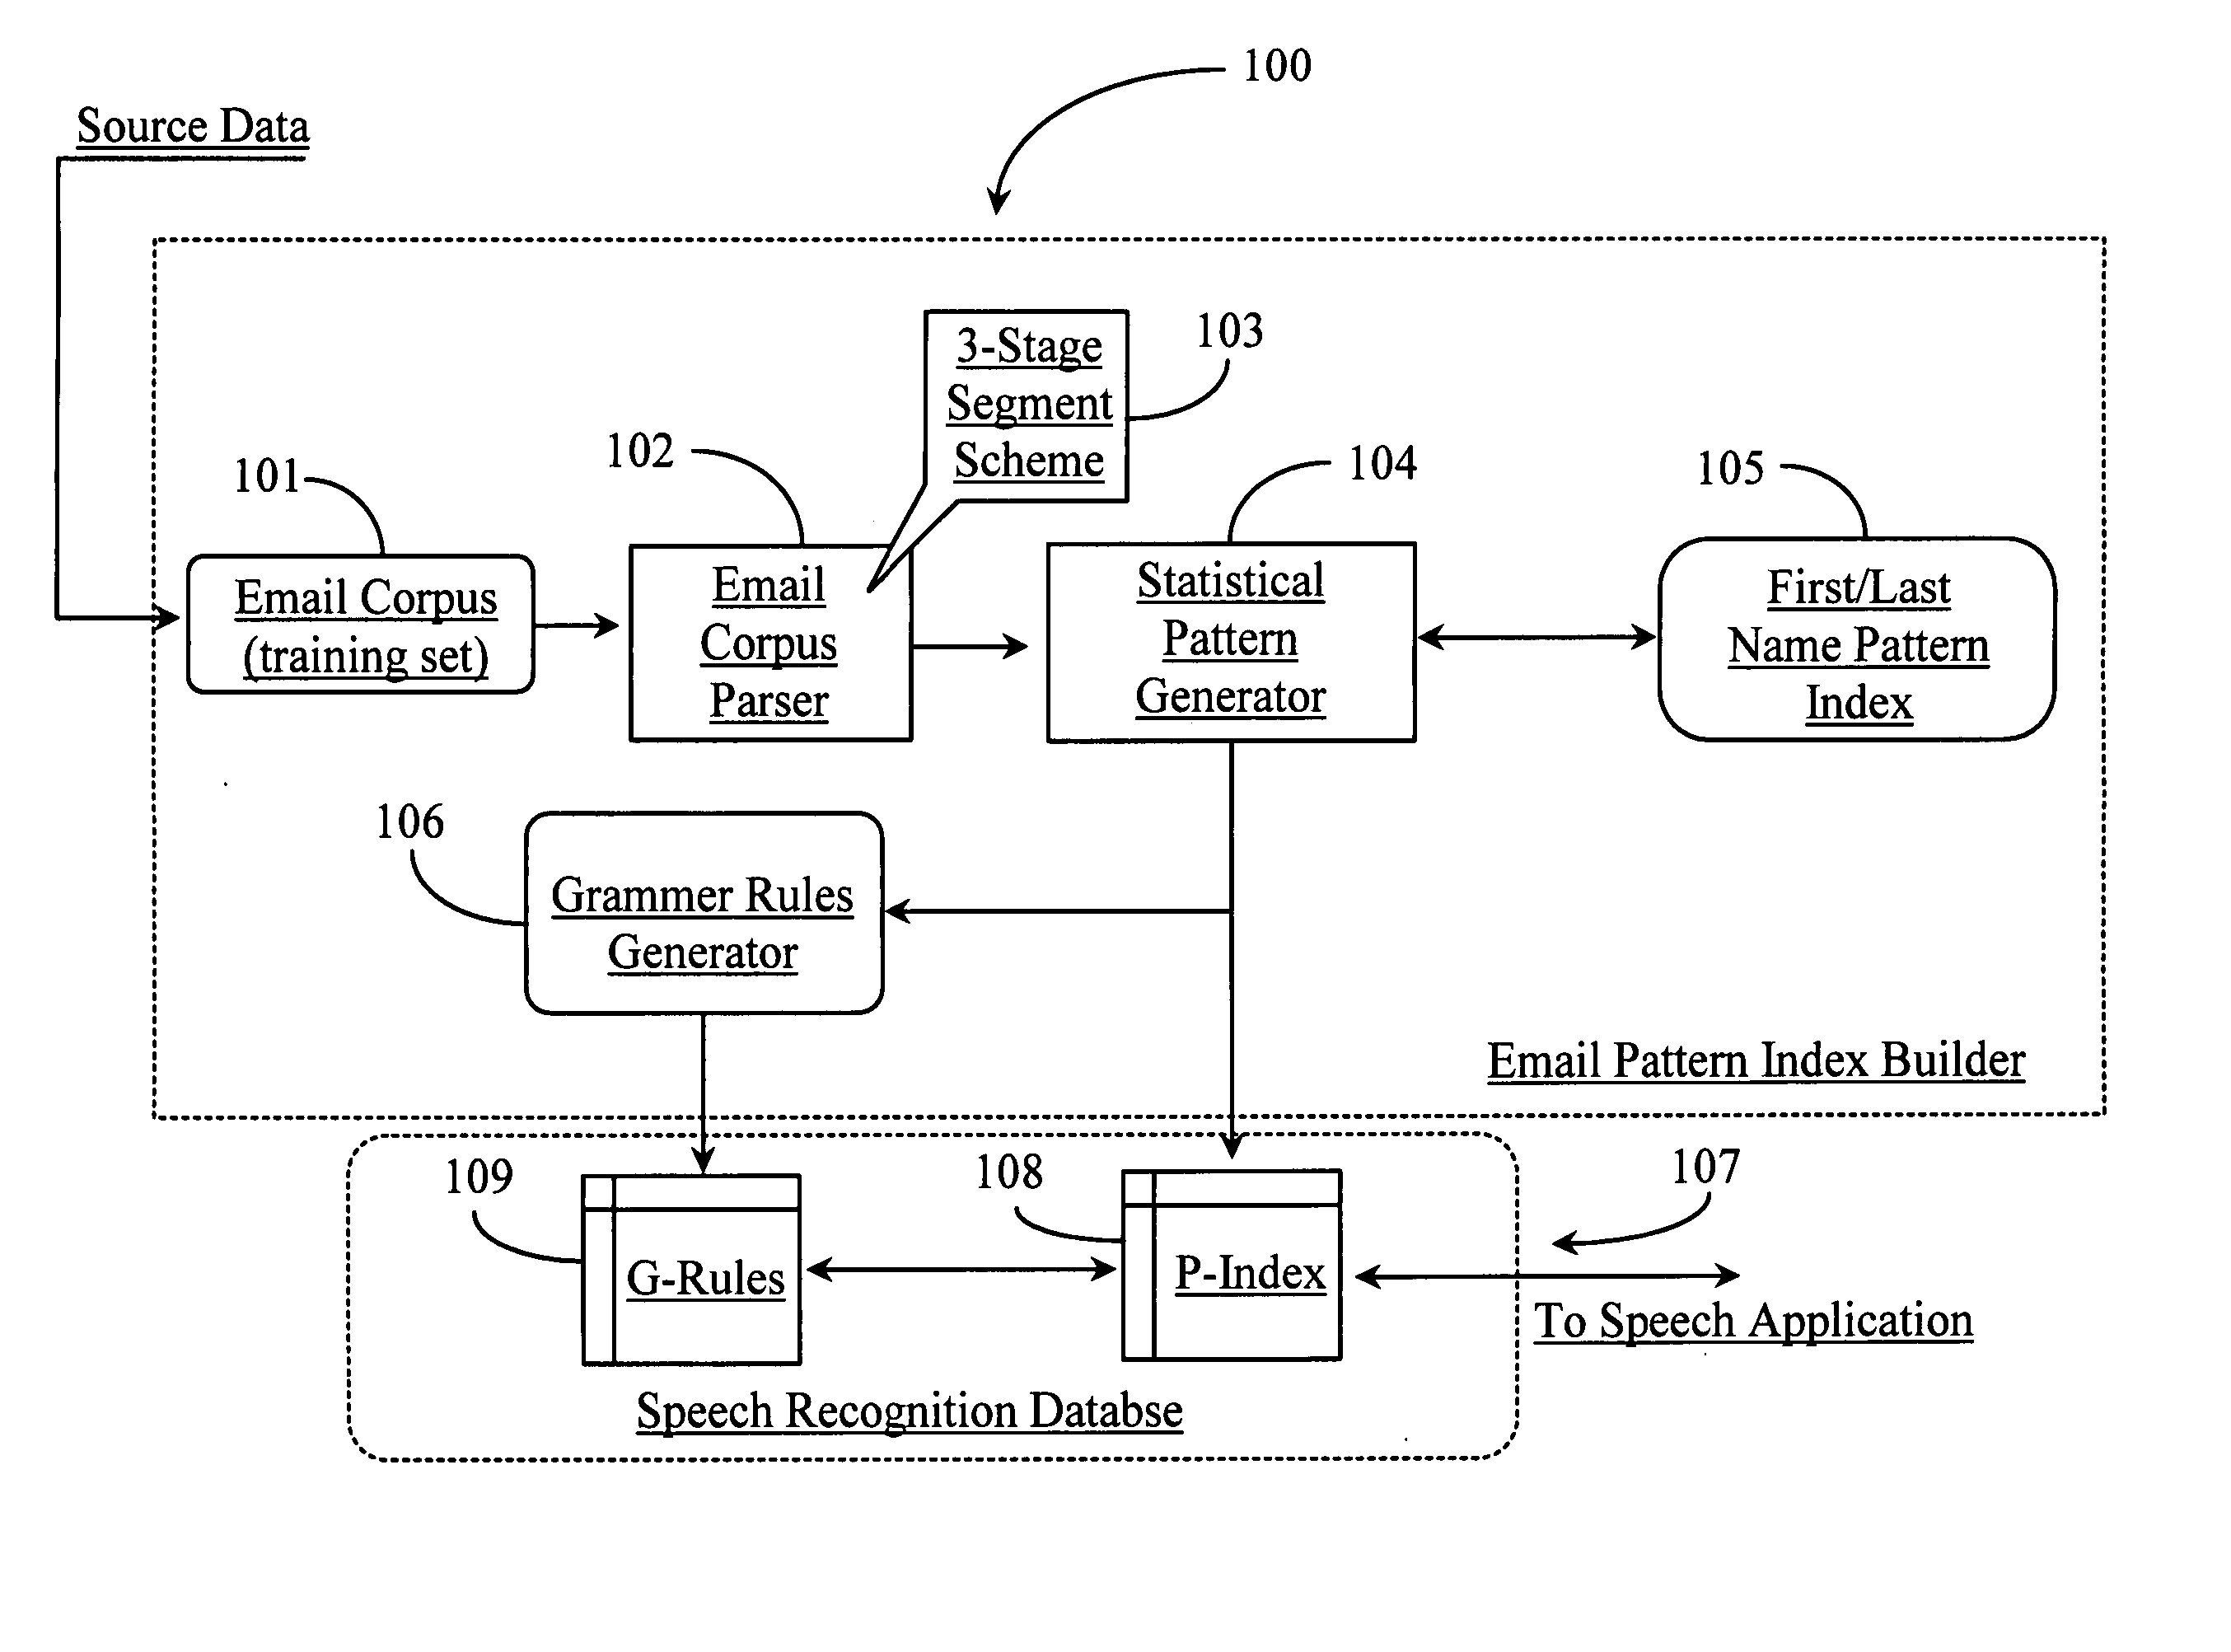 Email capture system for a voice recognition speech application